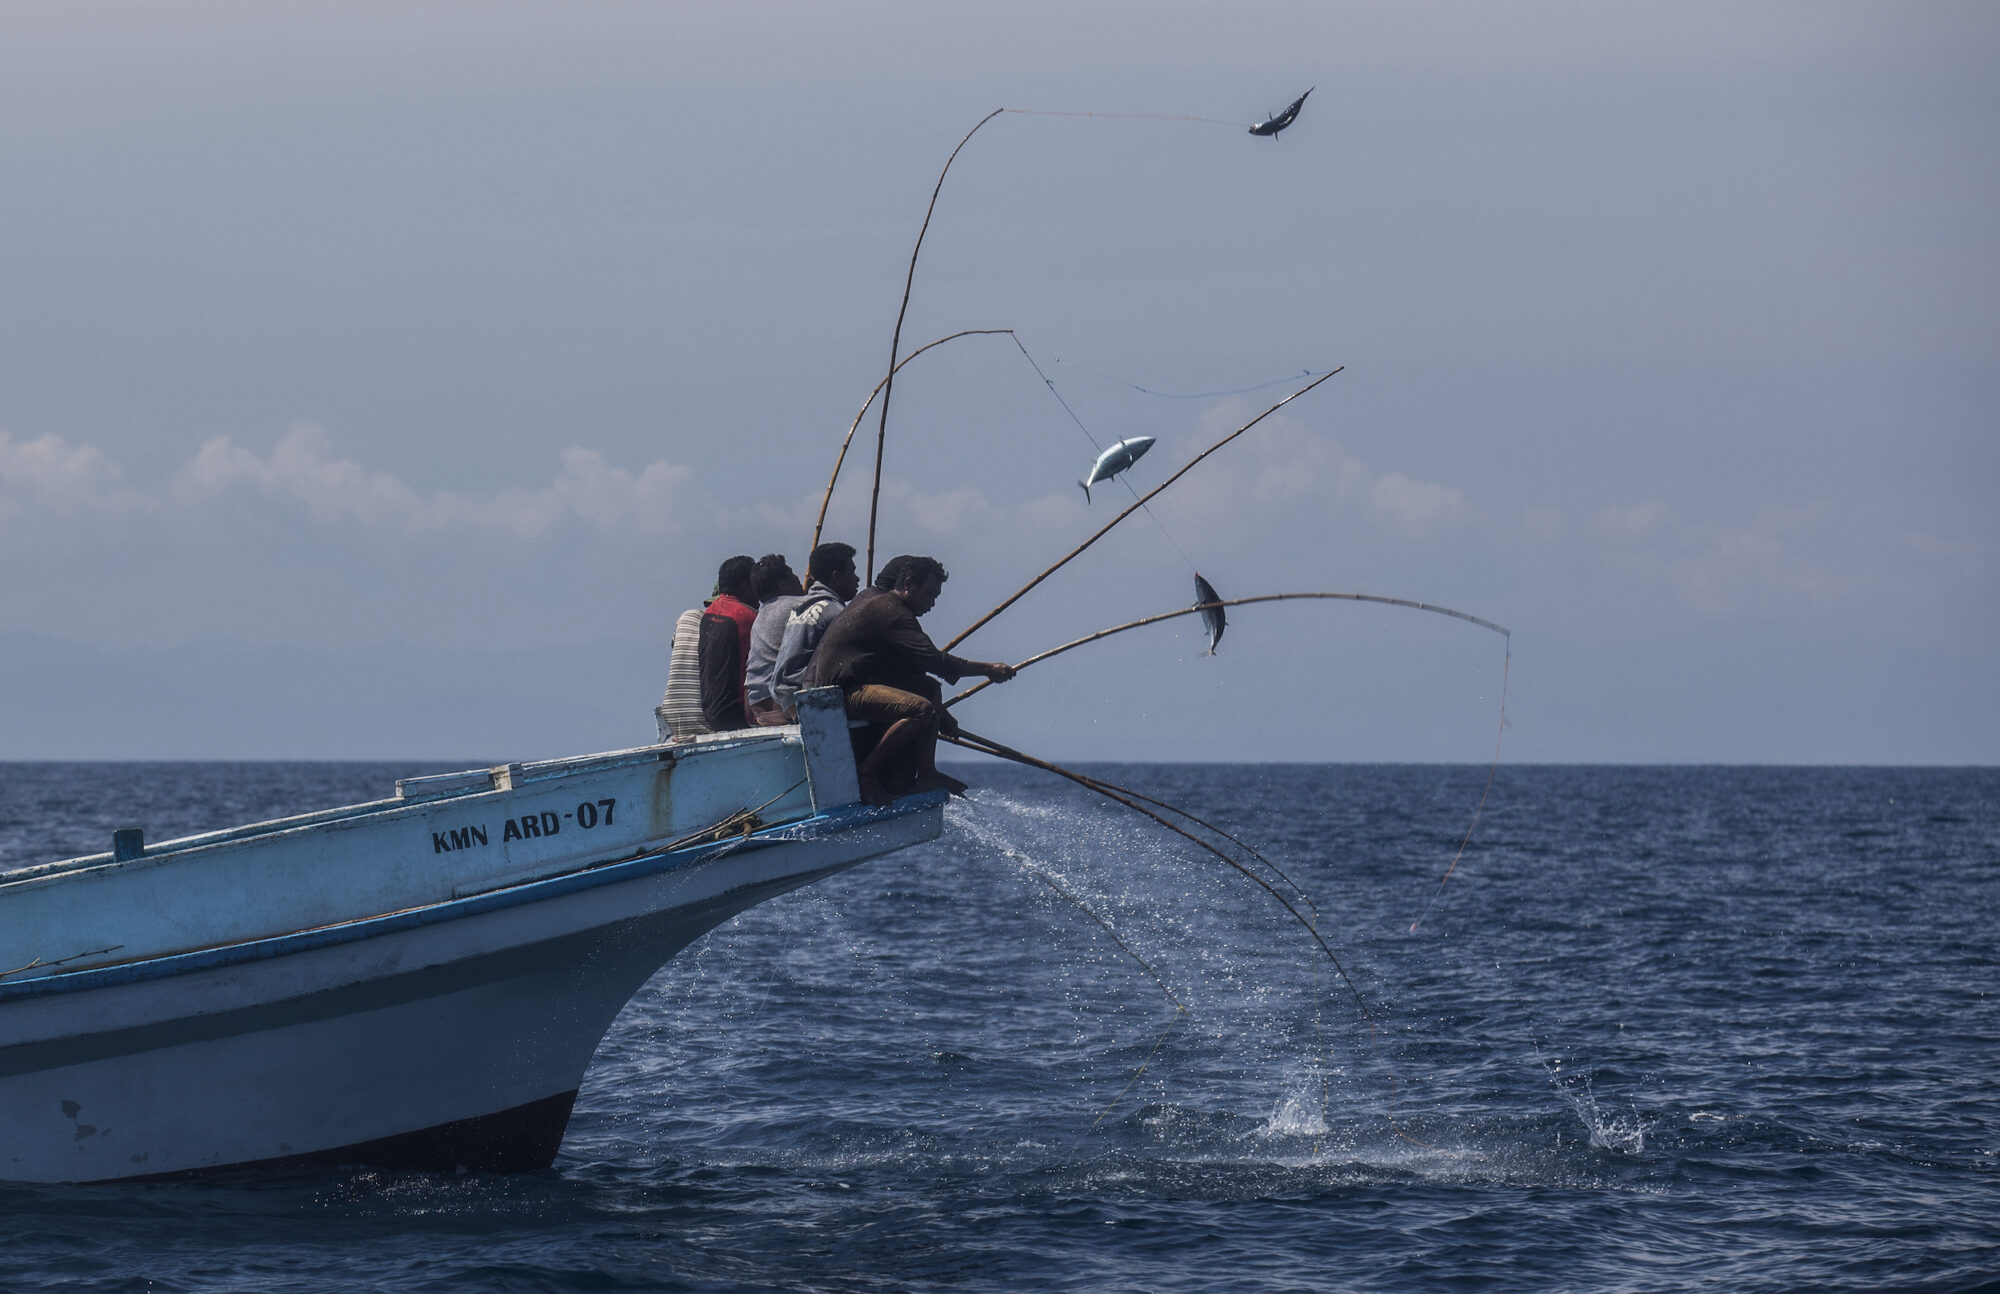 Tuna pole-and-line fishing, sitting on the end of a boat in Indonesia